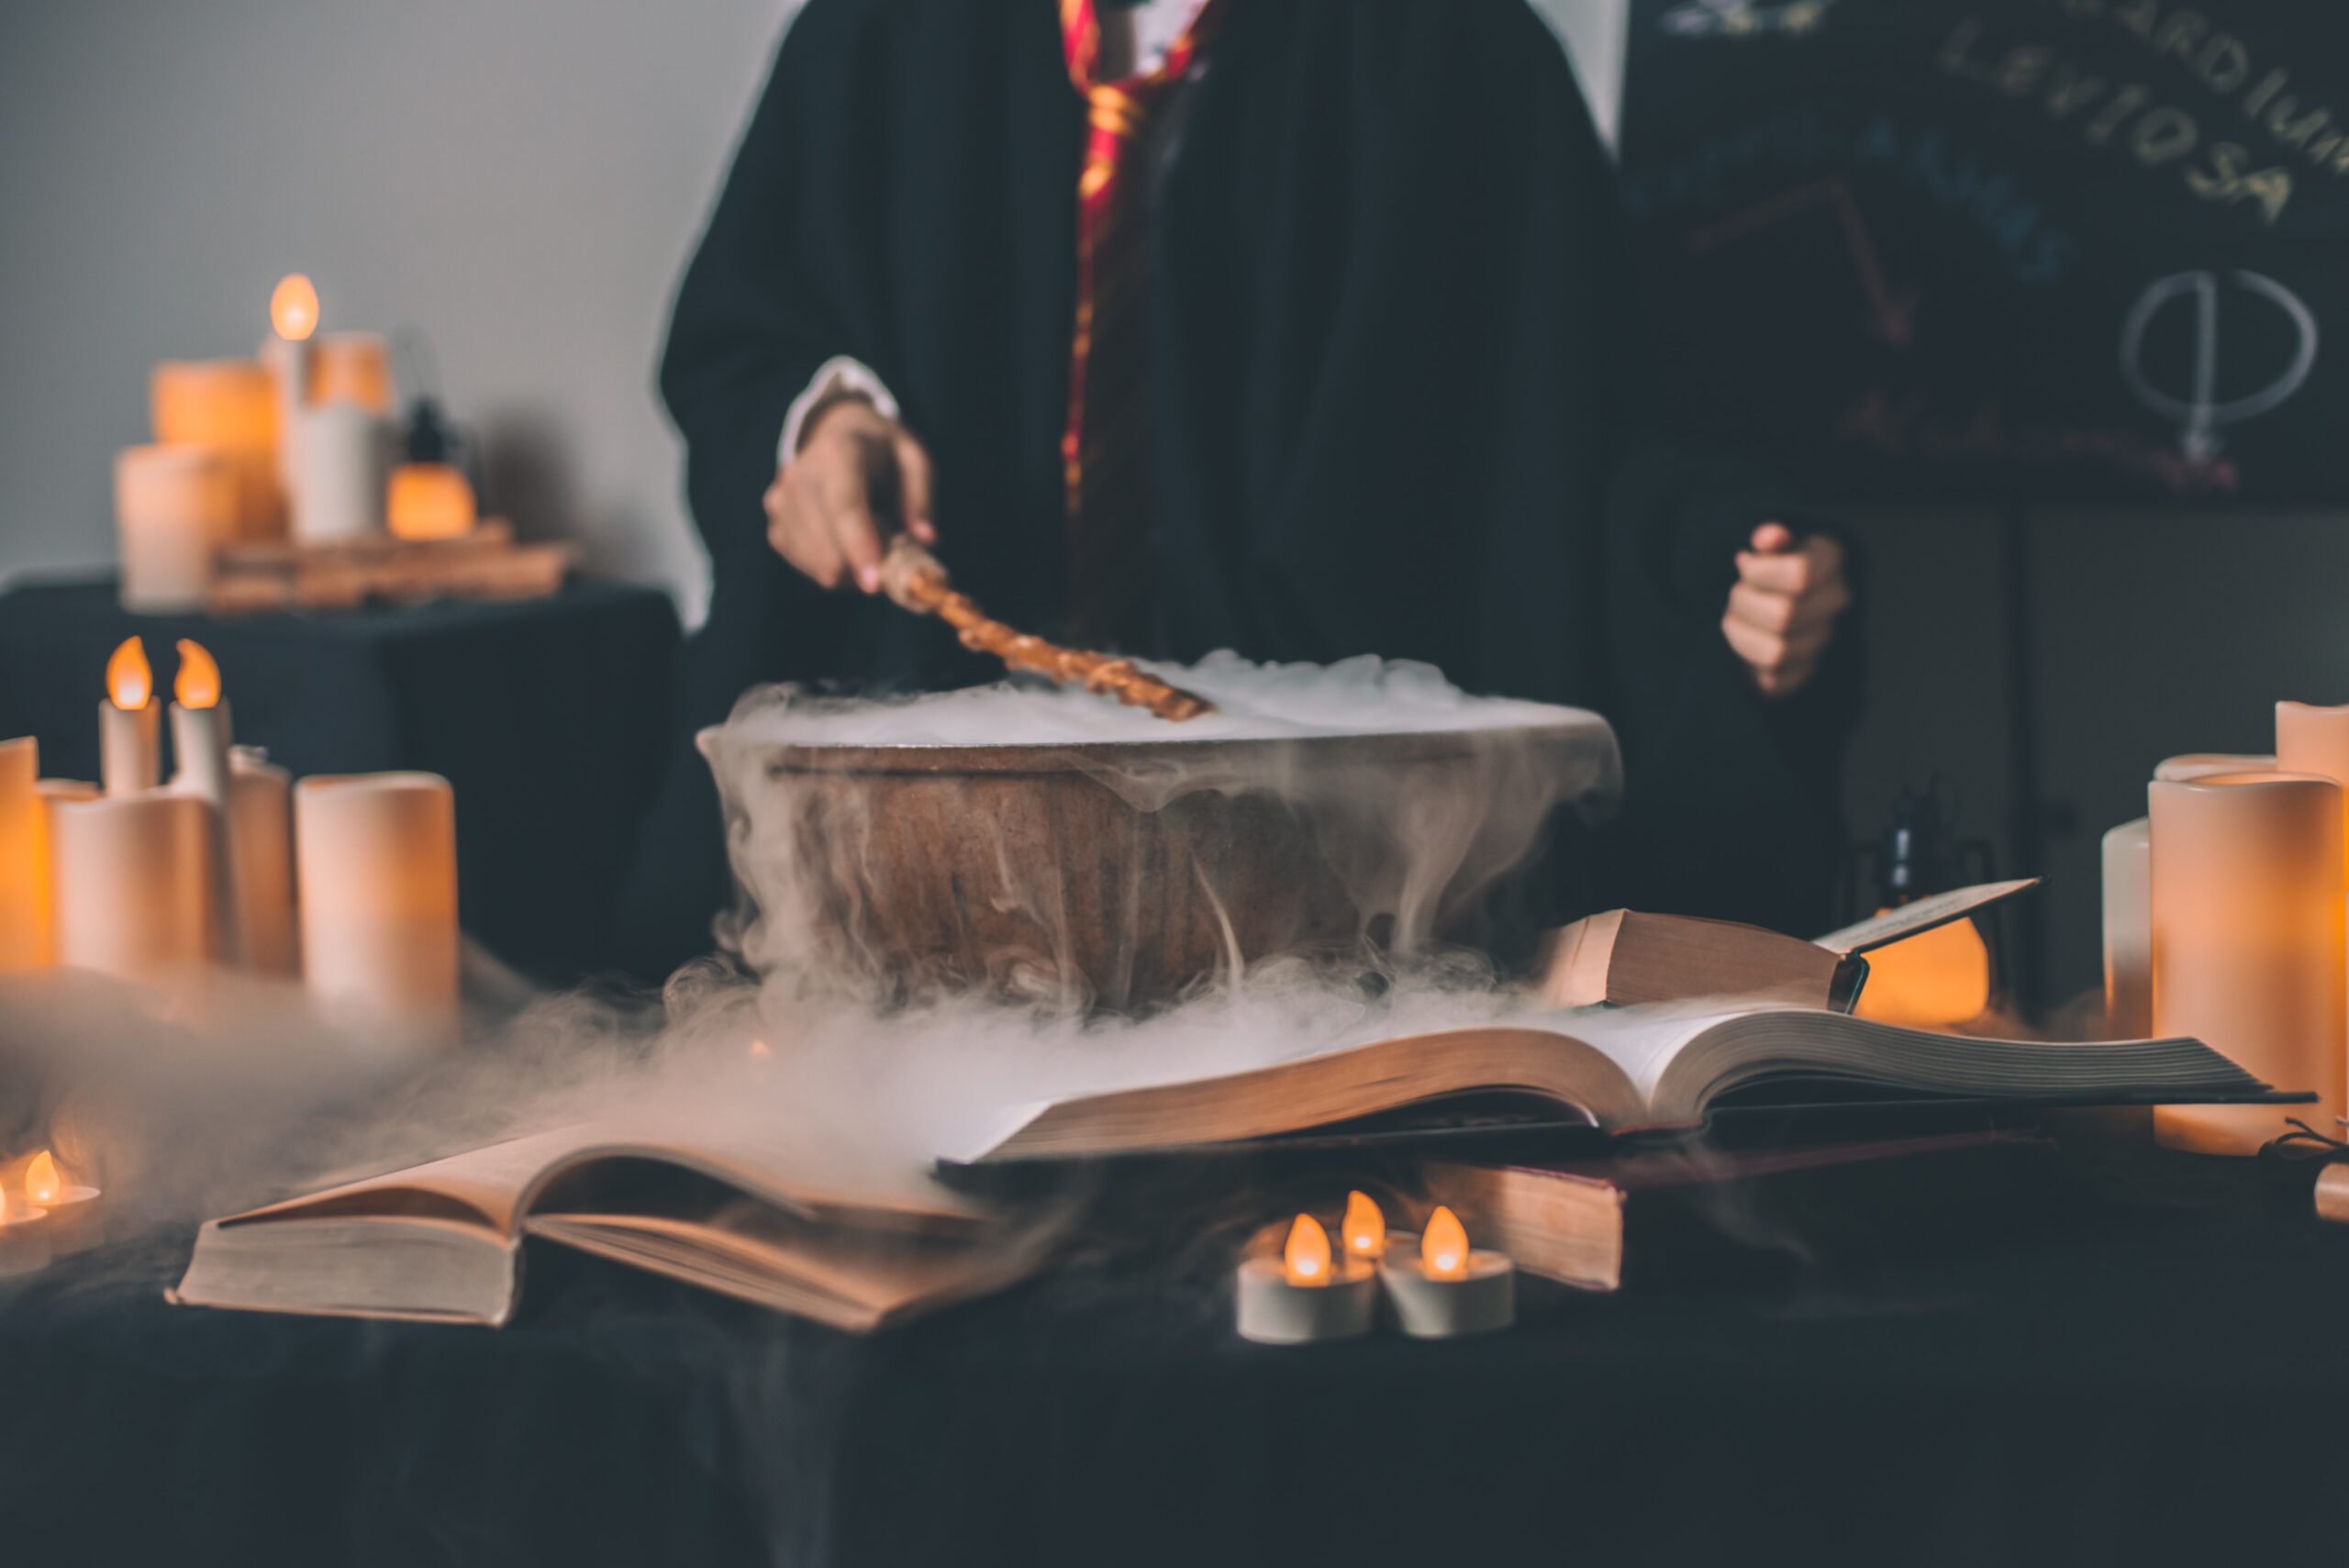 These are the top six Harry Potter themed accommodations from all over the world. 
pictured: an image of a young person holding a wand wearing a Hogwarts robe and doing a spell over a boiling cauldron